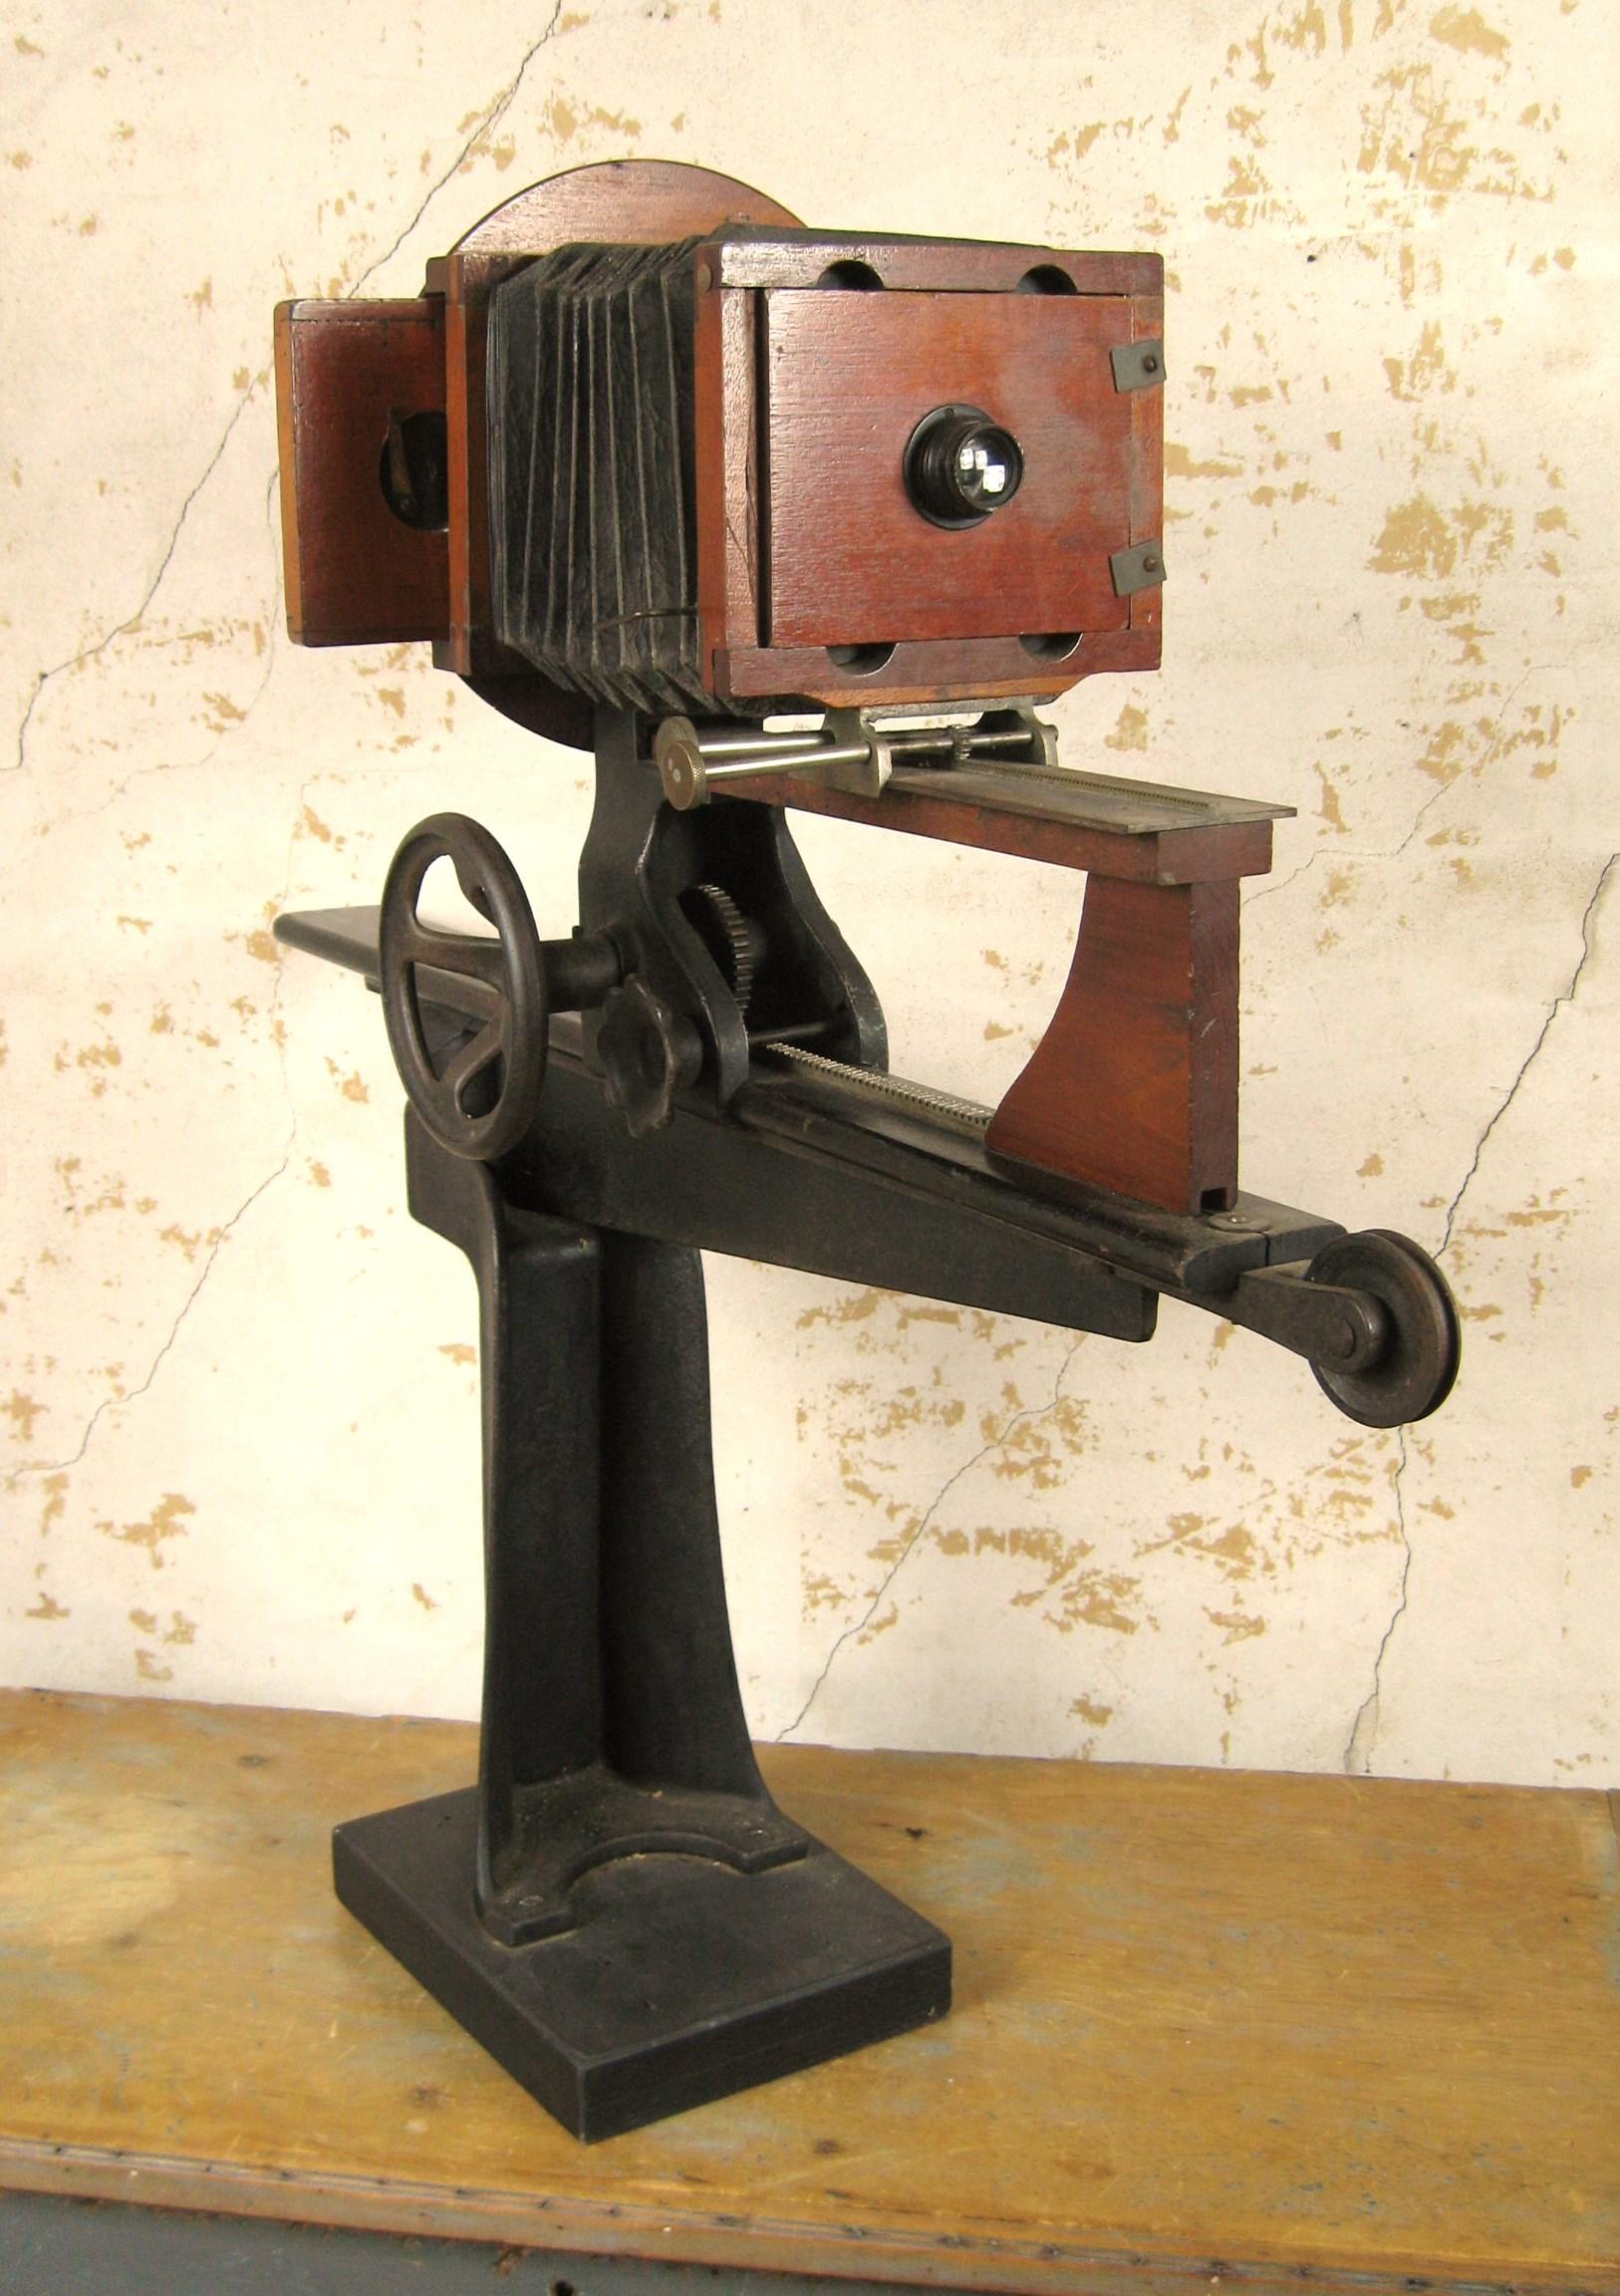 Early Wooden Antique Camera / Enlarger Circa 1910s
Please look at the photos, this has not been touched in decades. It is just the way you would like to find it, untouched. True antique Primitive piece that came out my historic 1769 Hudson Valley